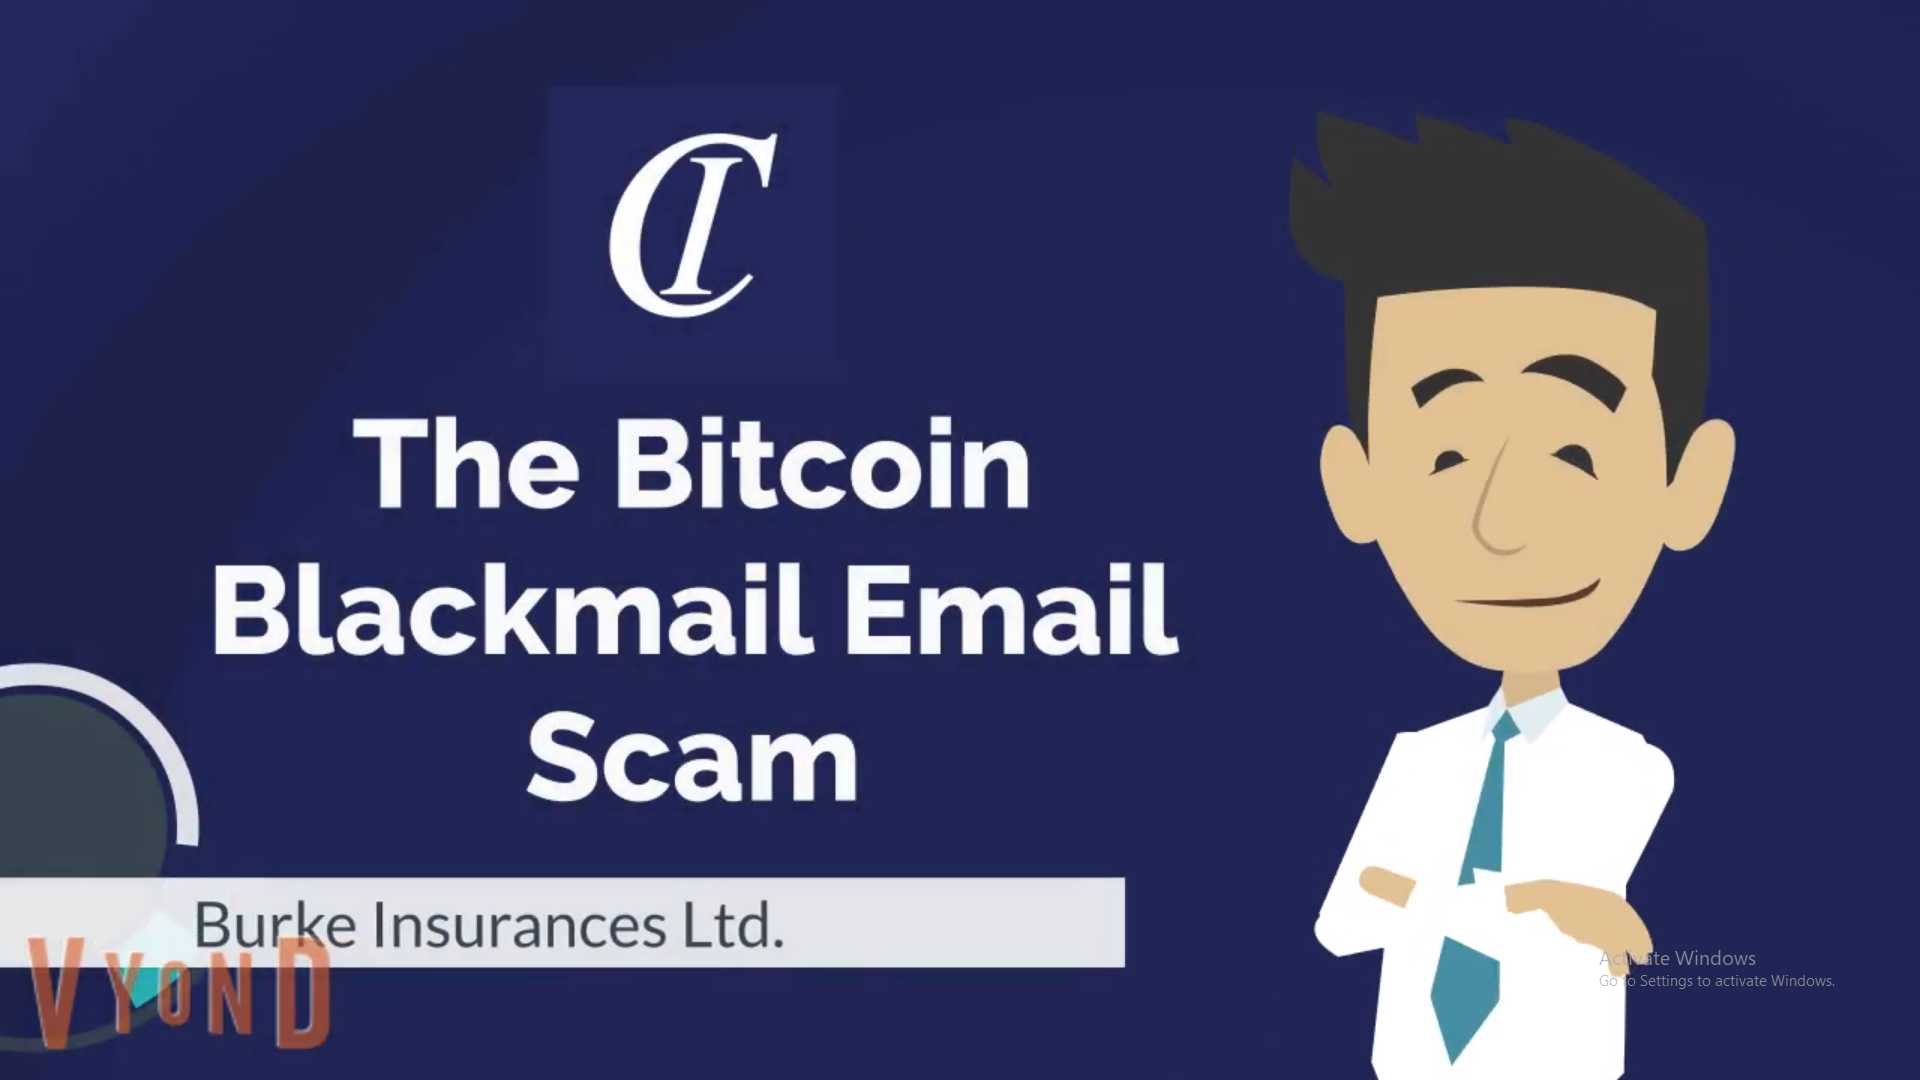 The Bitcoin Blackmail Email Scam